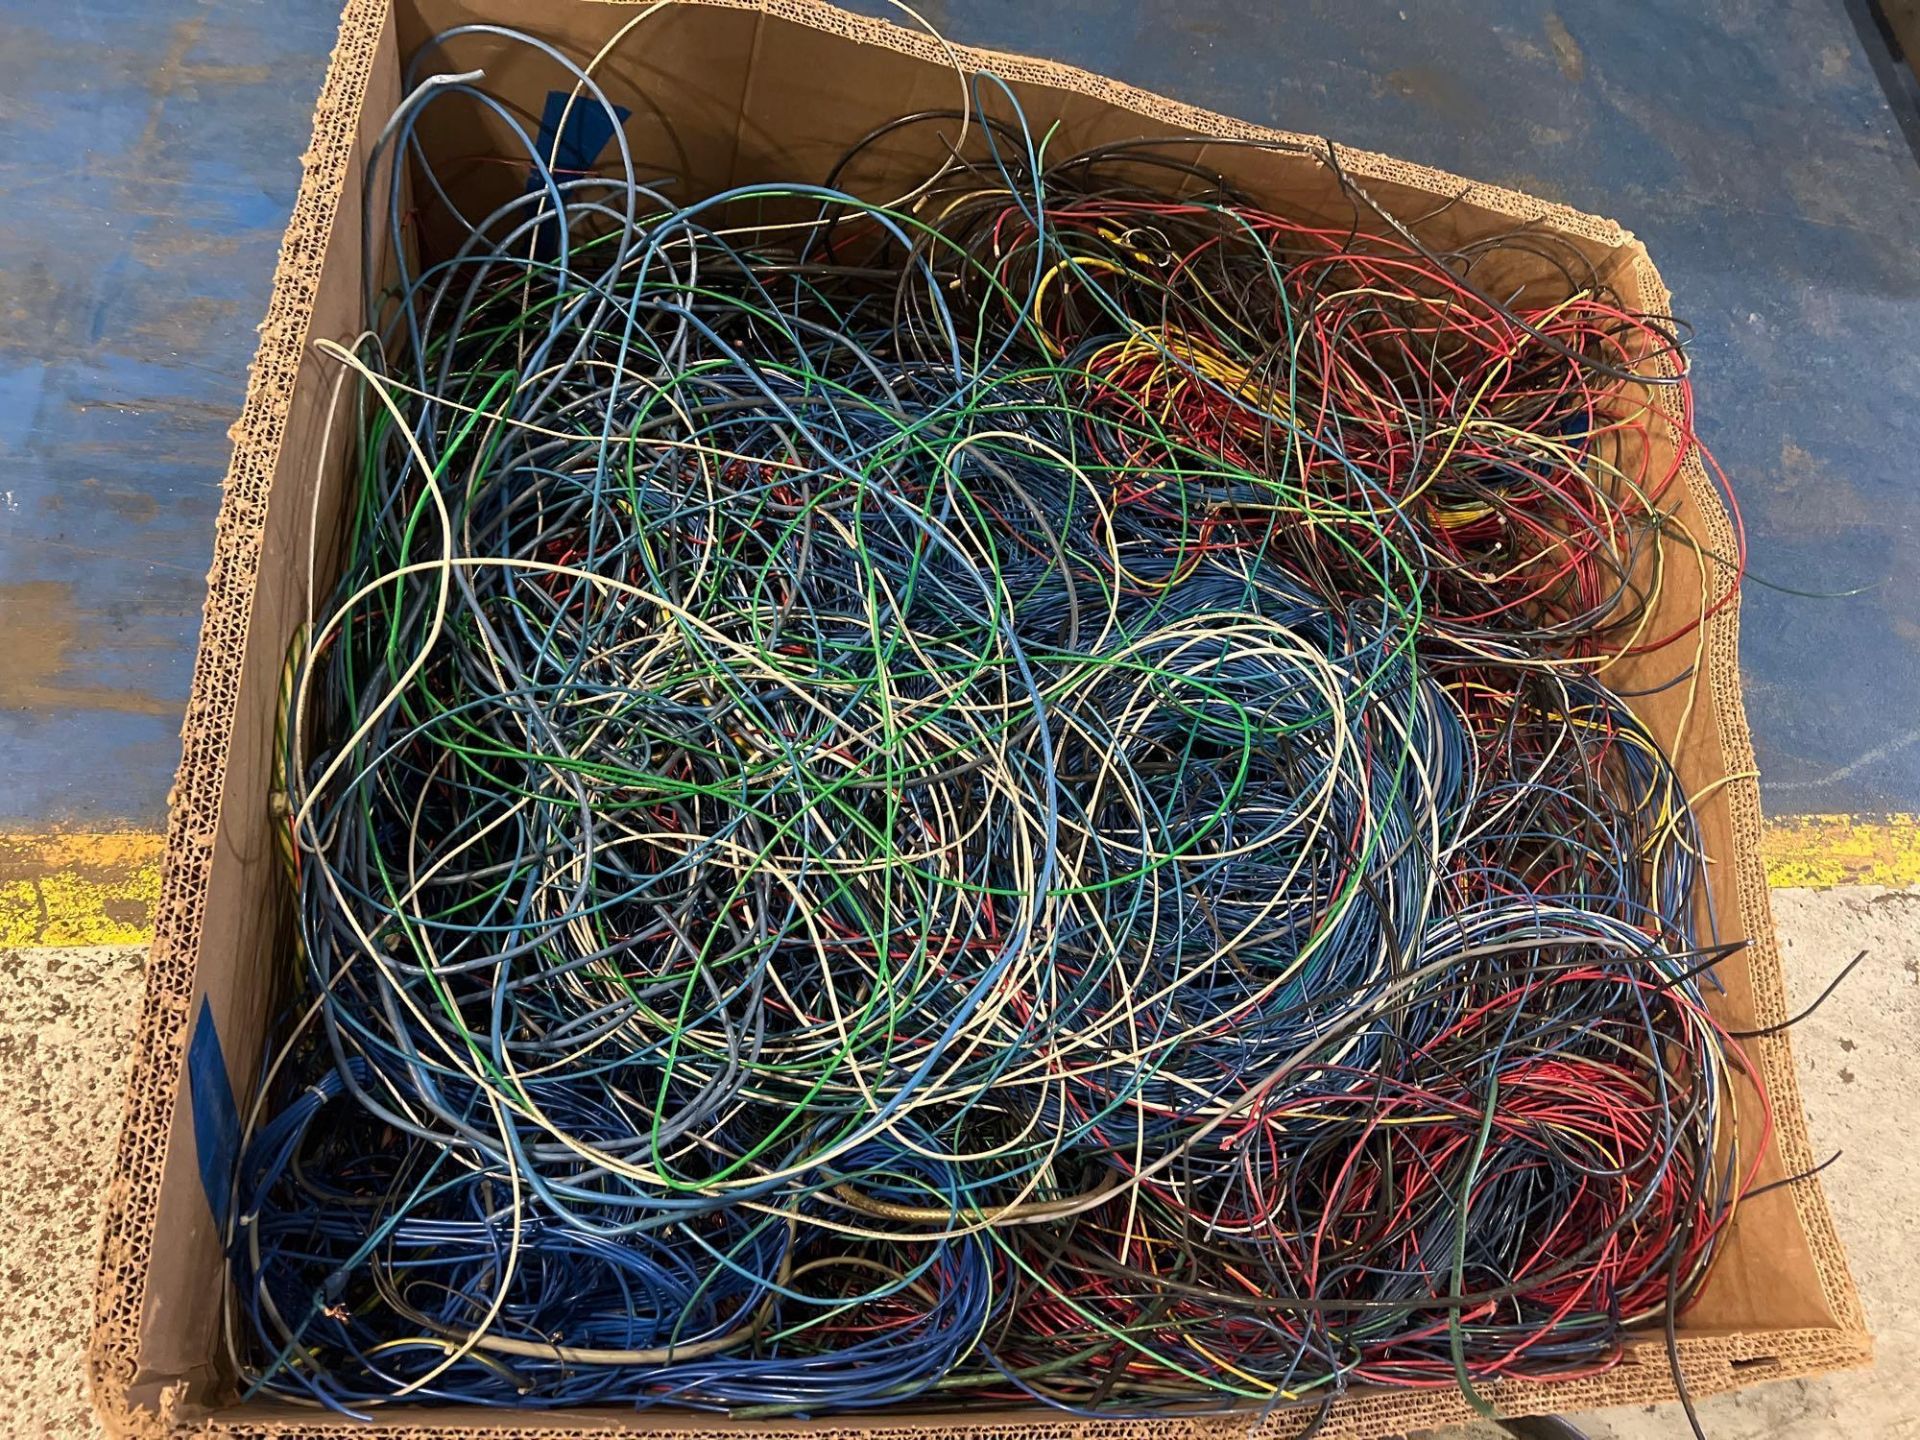 Scrap Wire (Single Wire) 227 Lbs. (Includes Tare Weight)